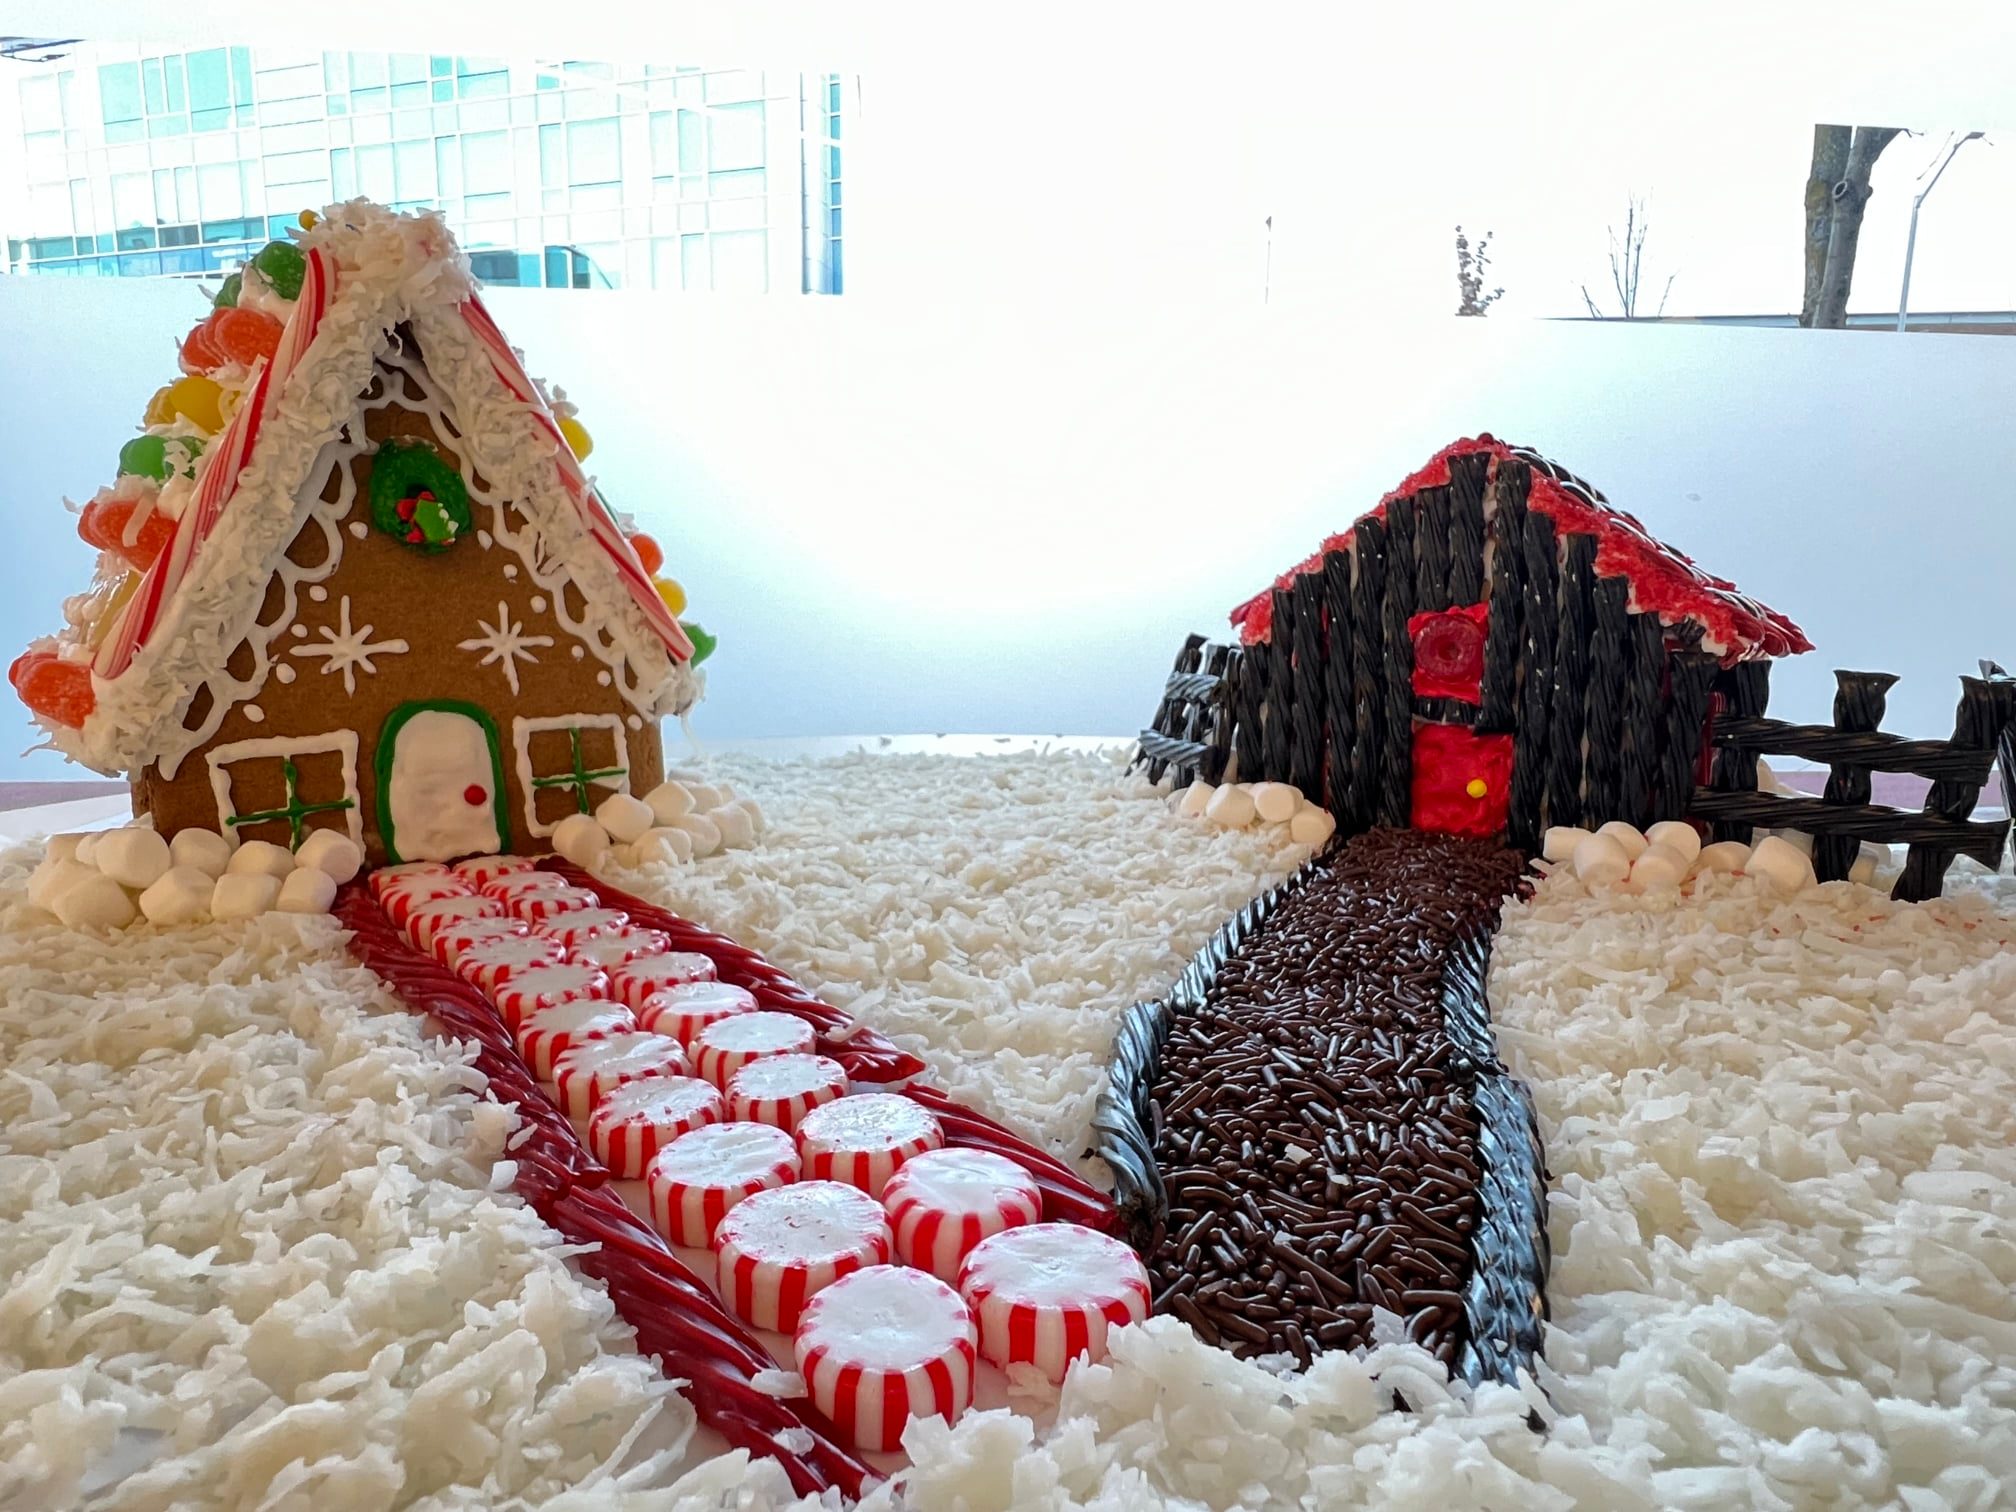 Two gingerbread houses: one bright and cheery, the other dark and gloomy